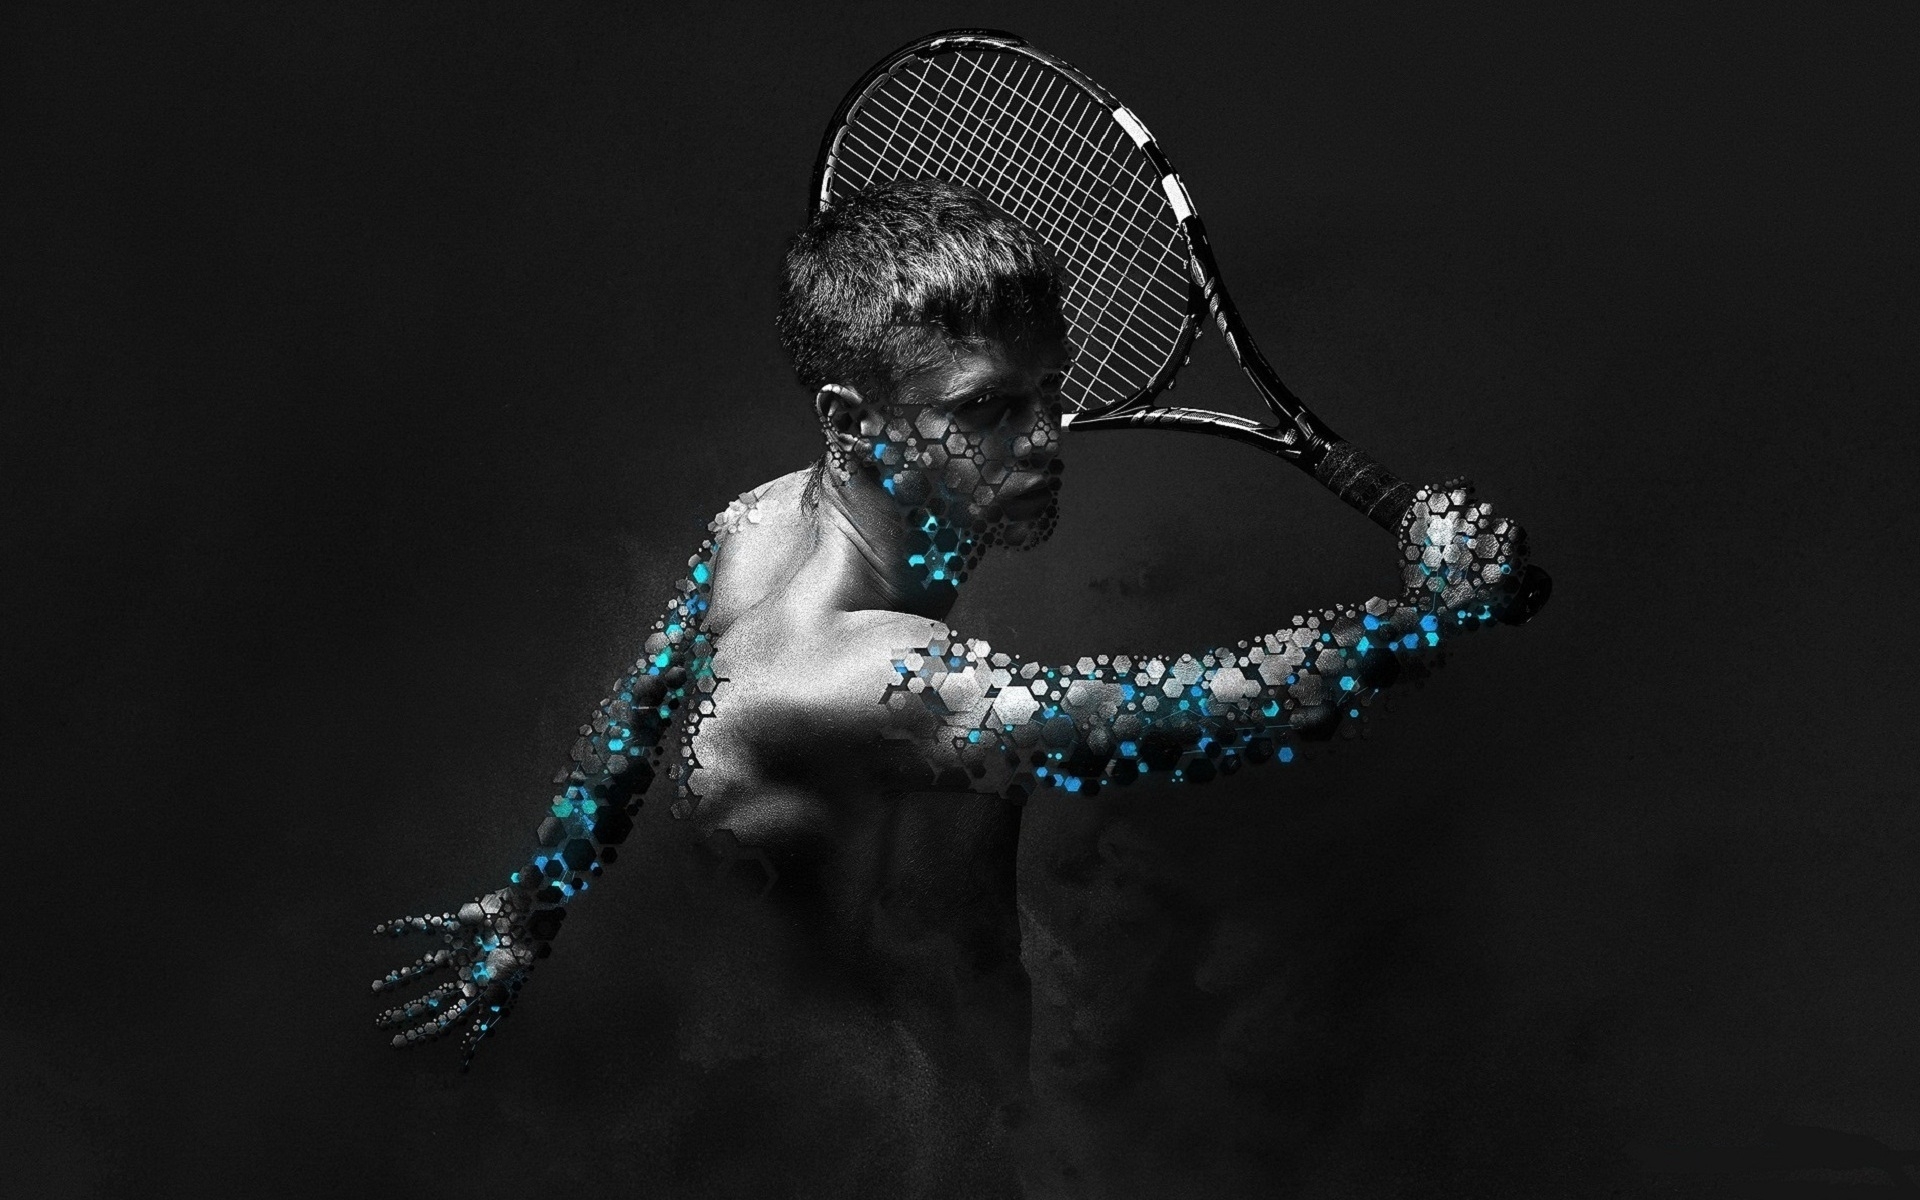 Tenis Player for 1920 x 1200 widescreen resolution